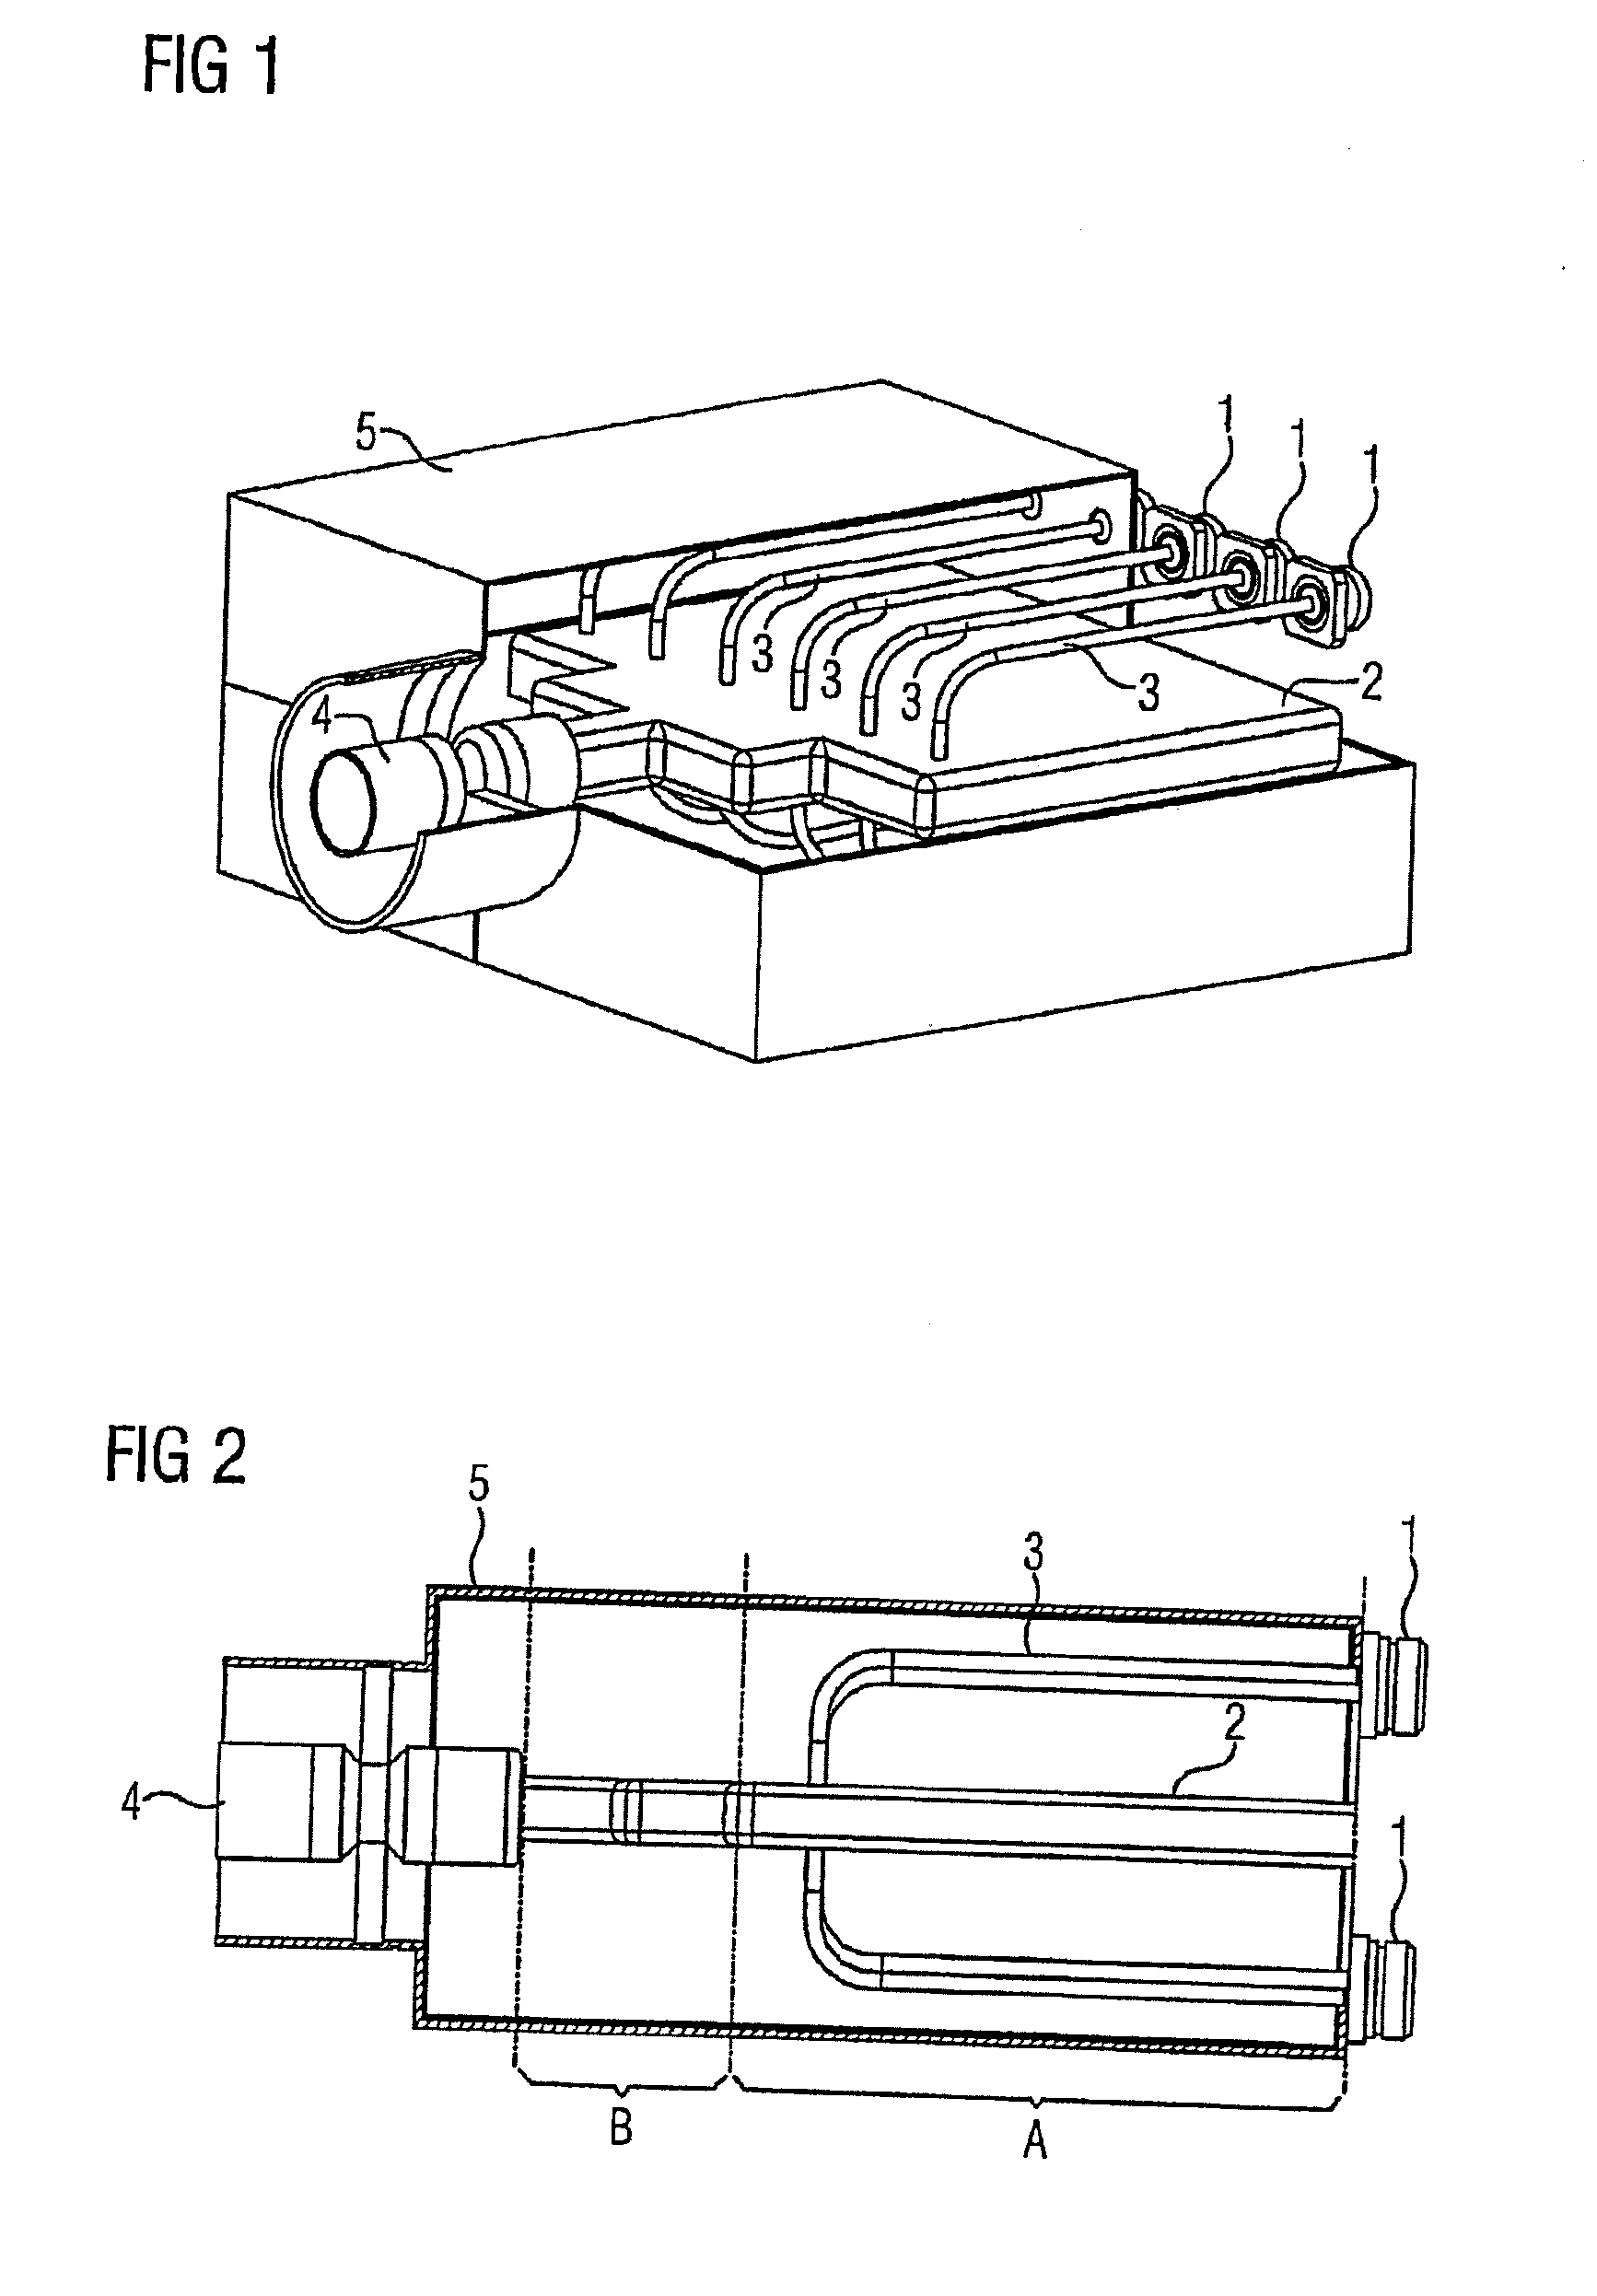 Method and Assembly for Radio-Frequency (RF) Power Coupling